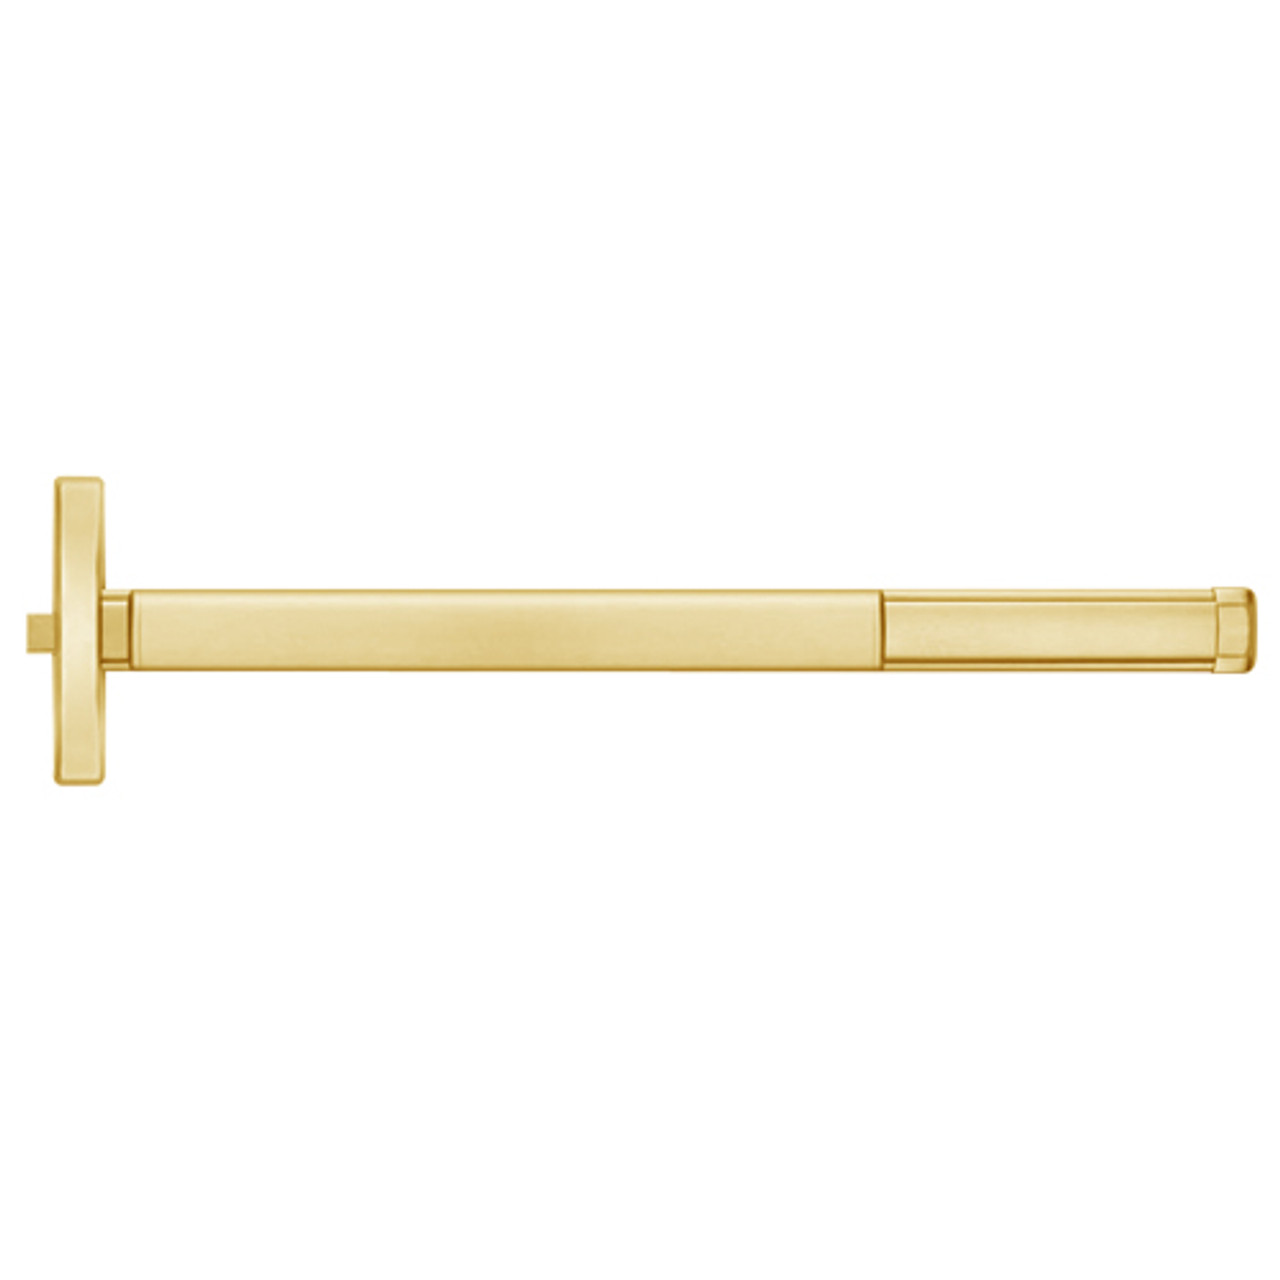 2401-605-48 PHI 2400 Series Non Fire Rated Apex Rim Exit Device Prepped for Cover Plate in Bright Brass Finish